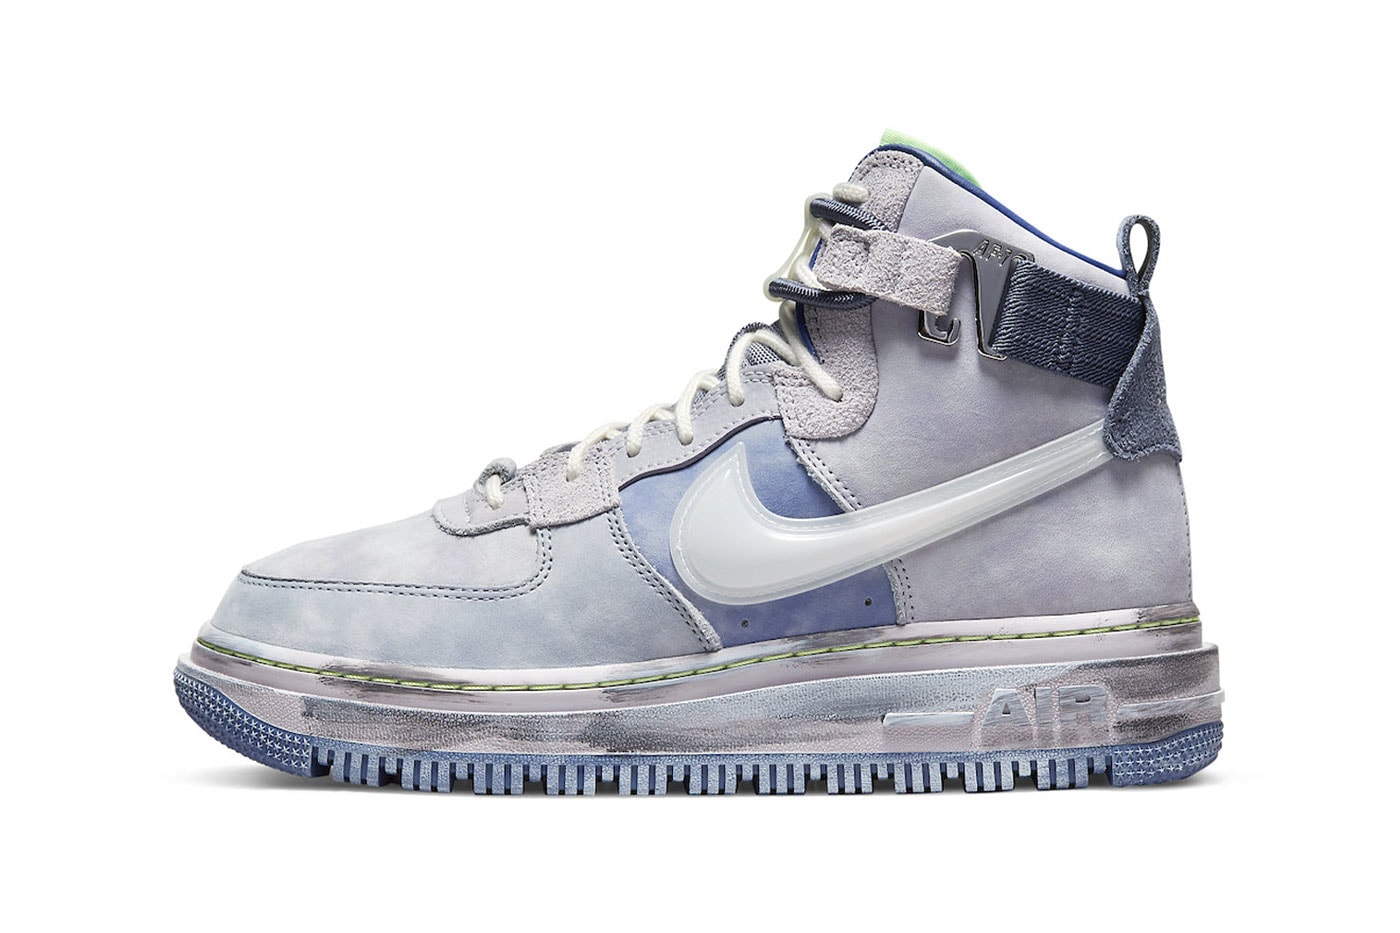 Nike Air Force 1 High Utility 2.0 in Deep Freeze Release | Hypebeast